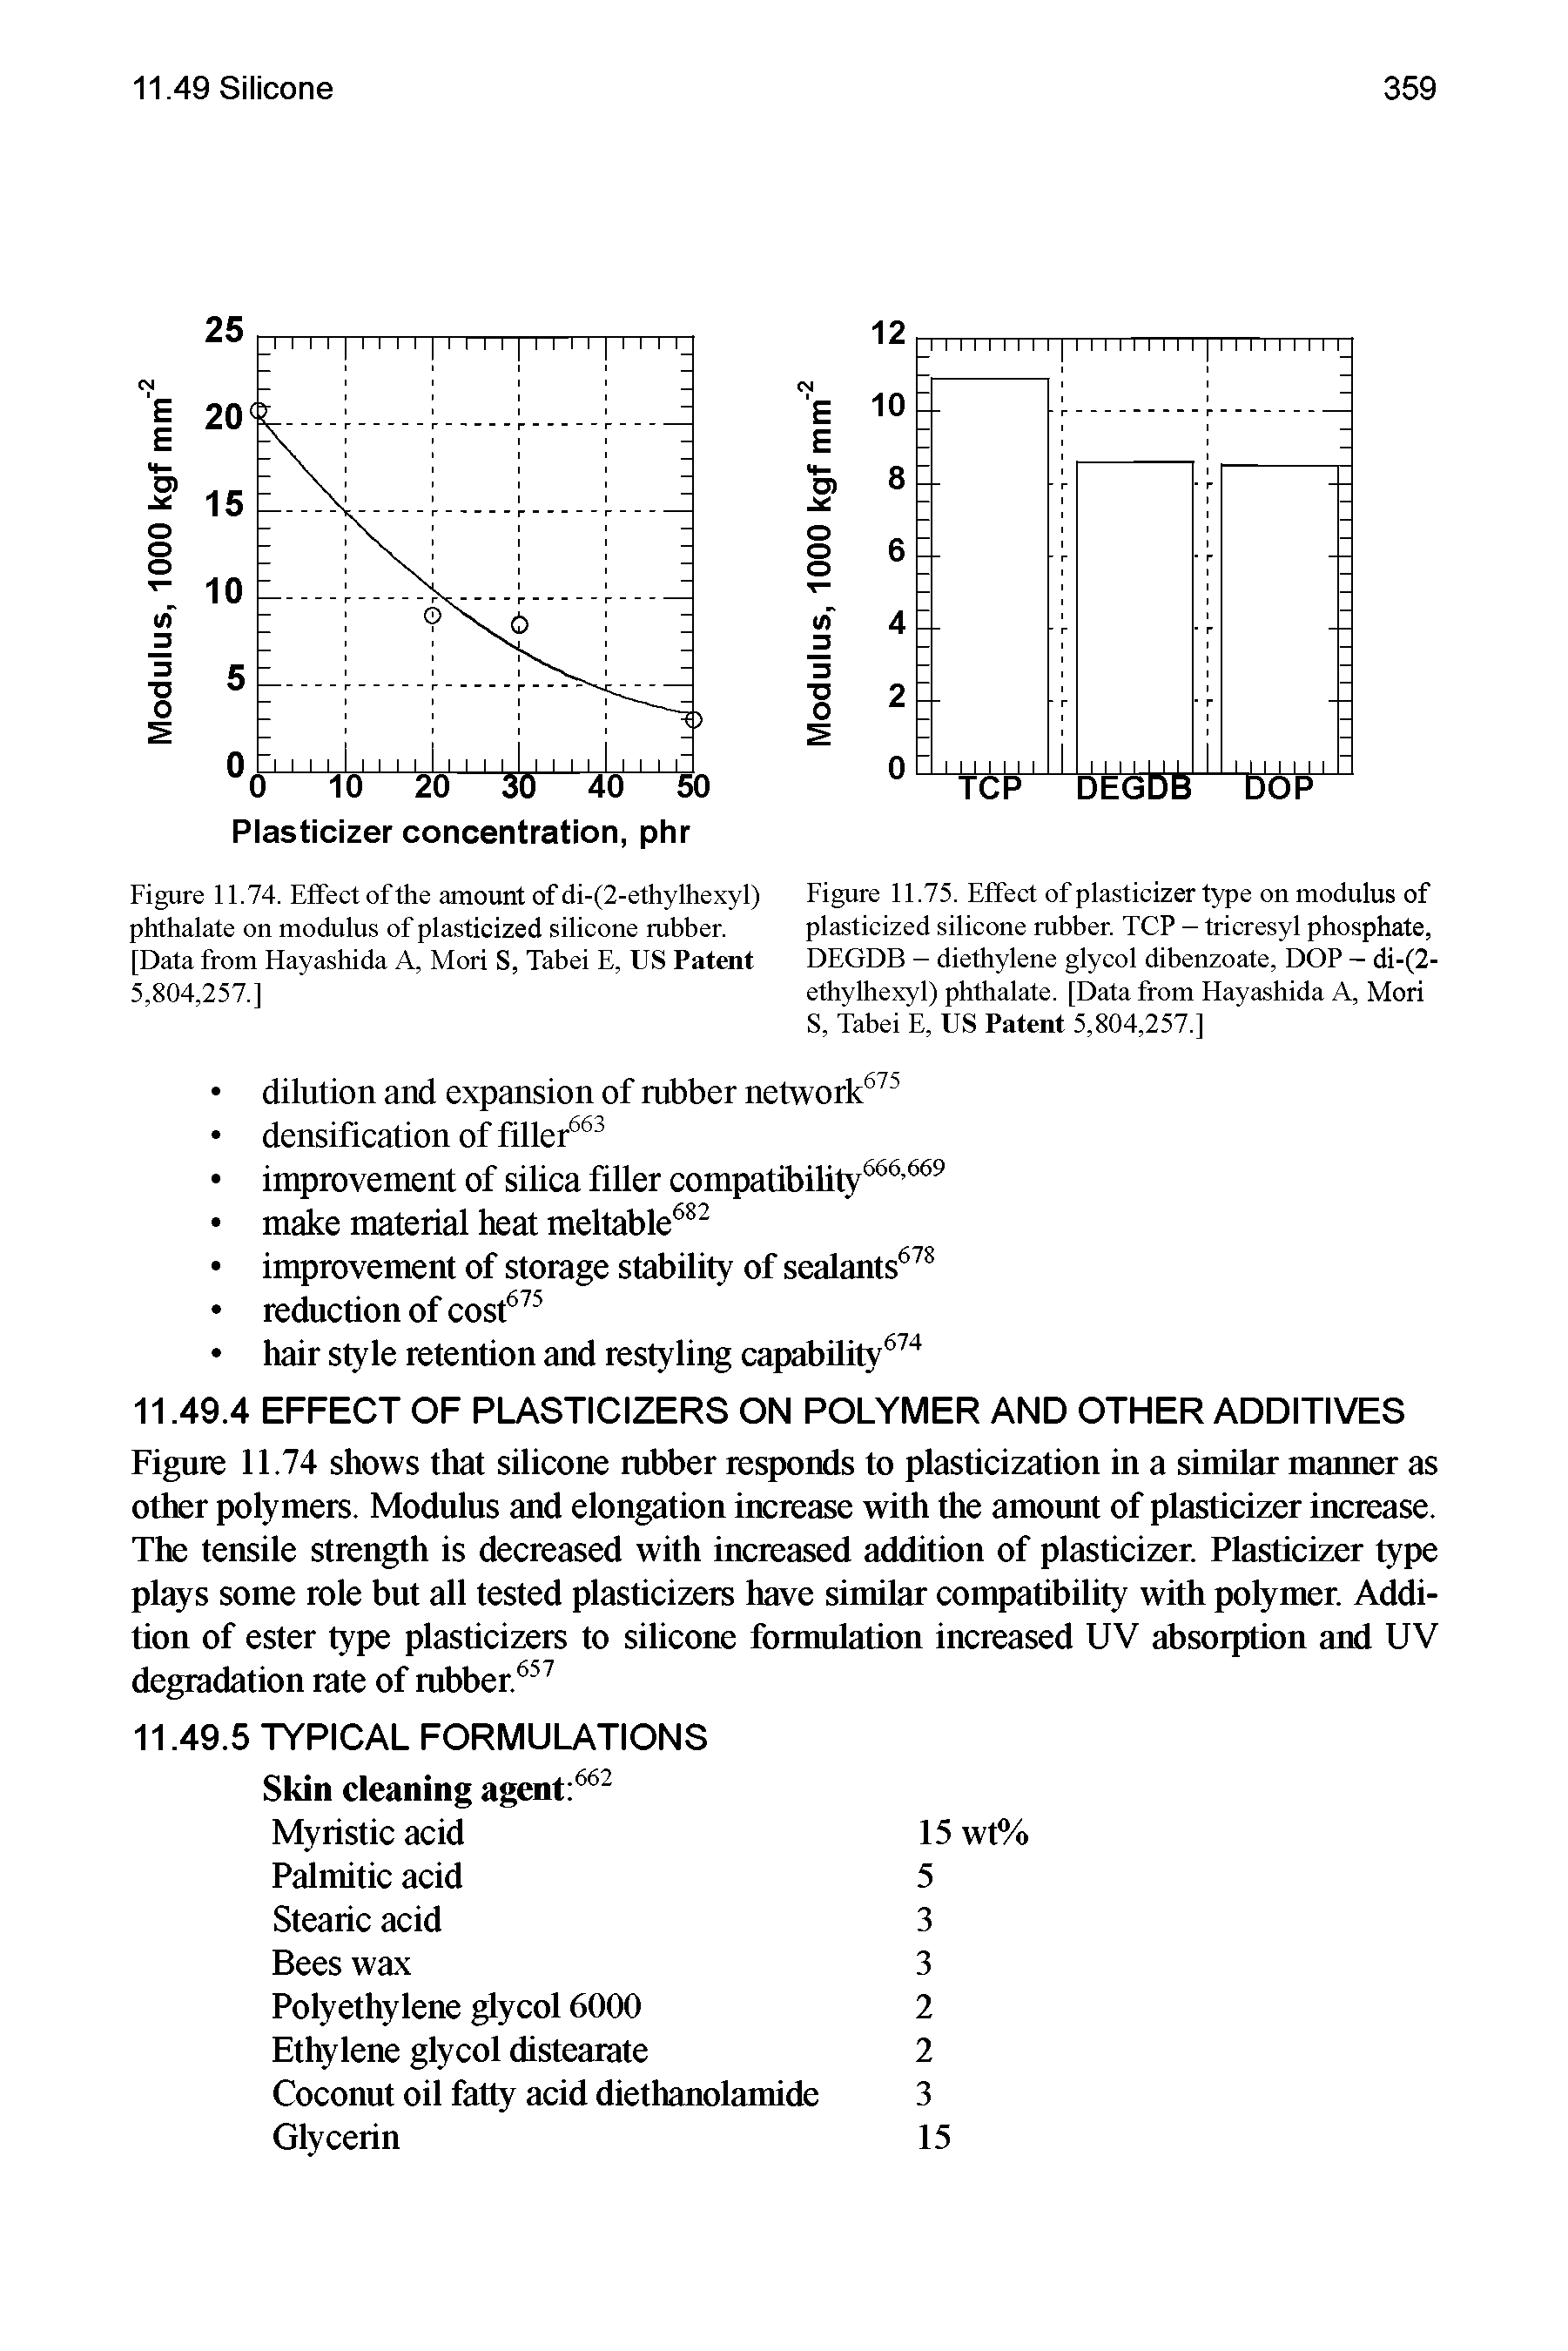 Figure 11.74. Effect of the amount of di-(2-ethylhexyl) phthalate on modulus of plasticized silicone mbber. [Data from Hayashida A, Mori S, Tabei E, US Patent 5,804,257.1...